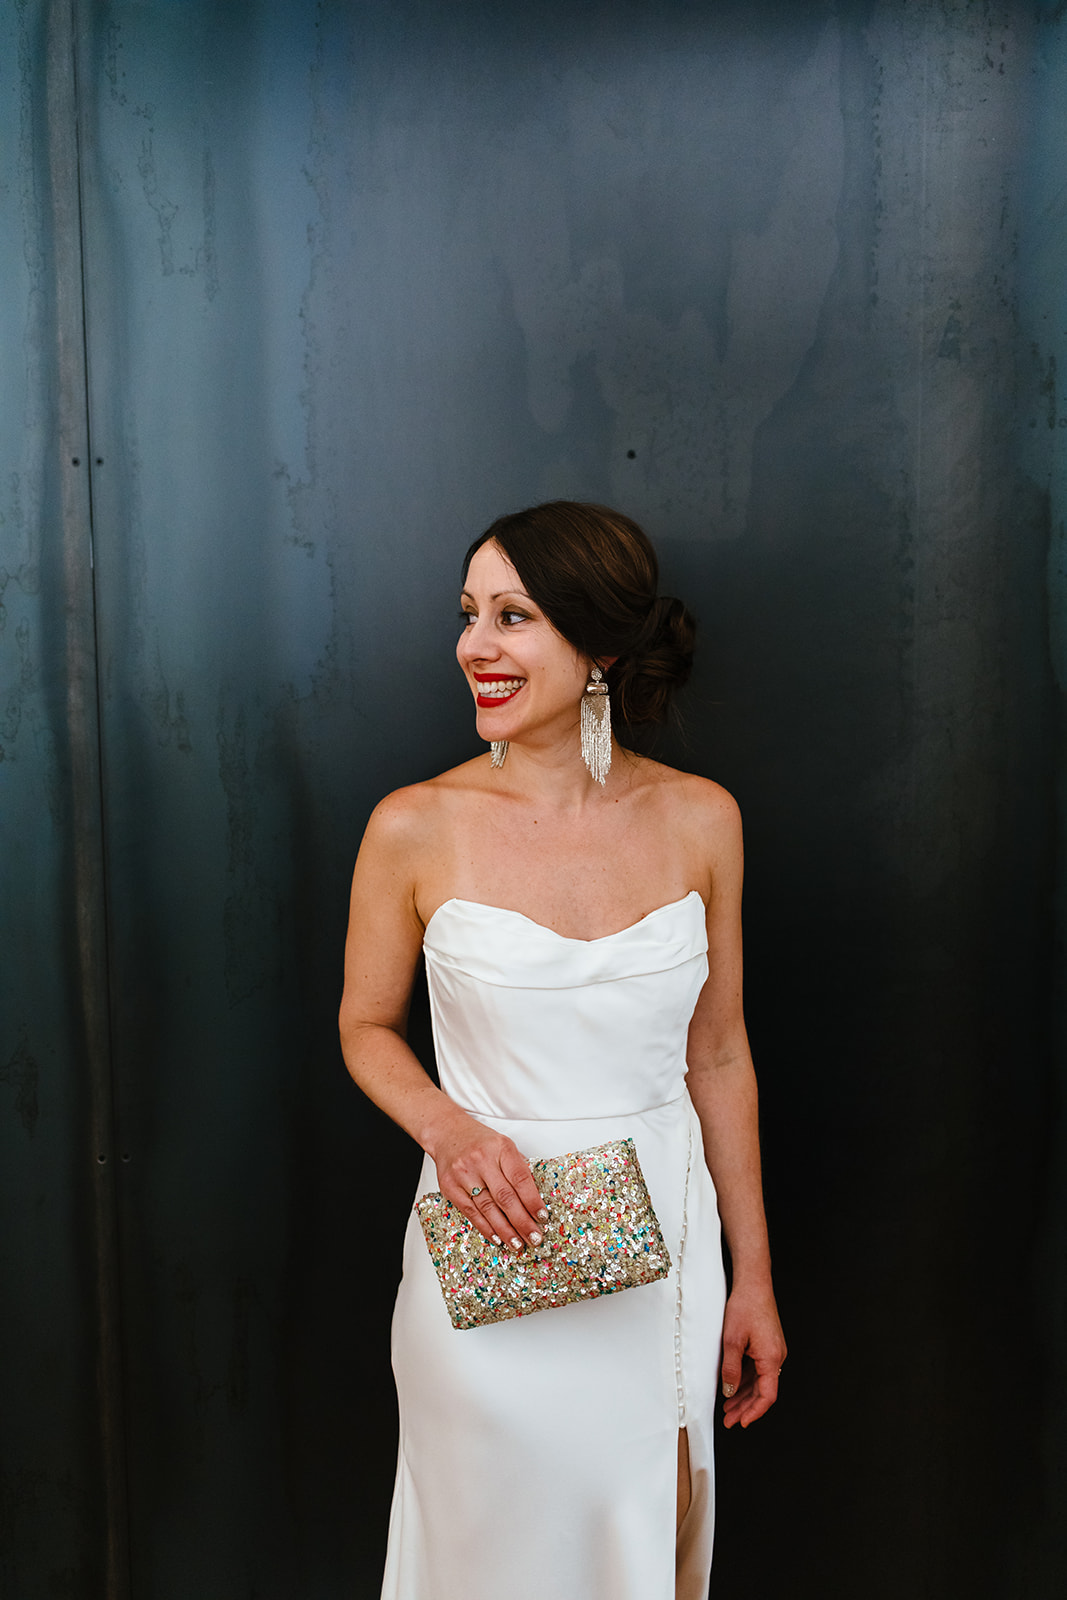 Bride is ready and holding her clutch while smiling